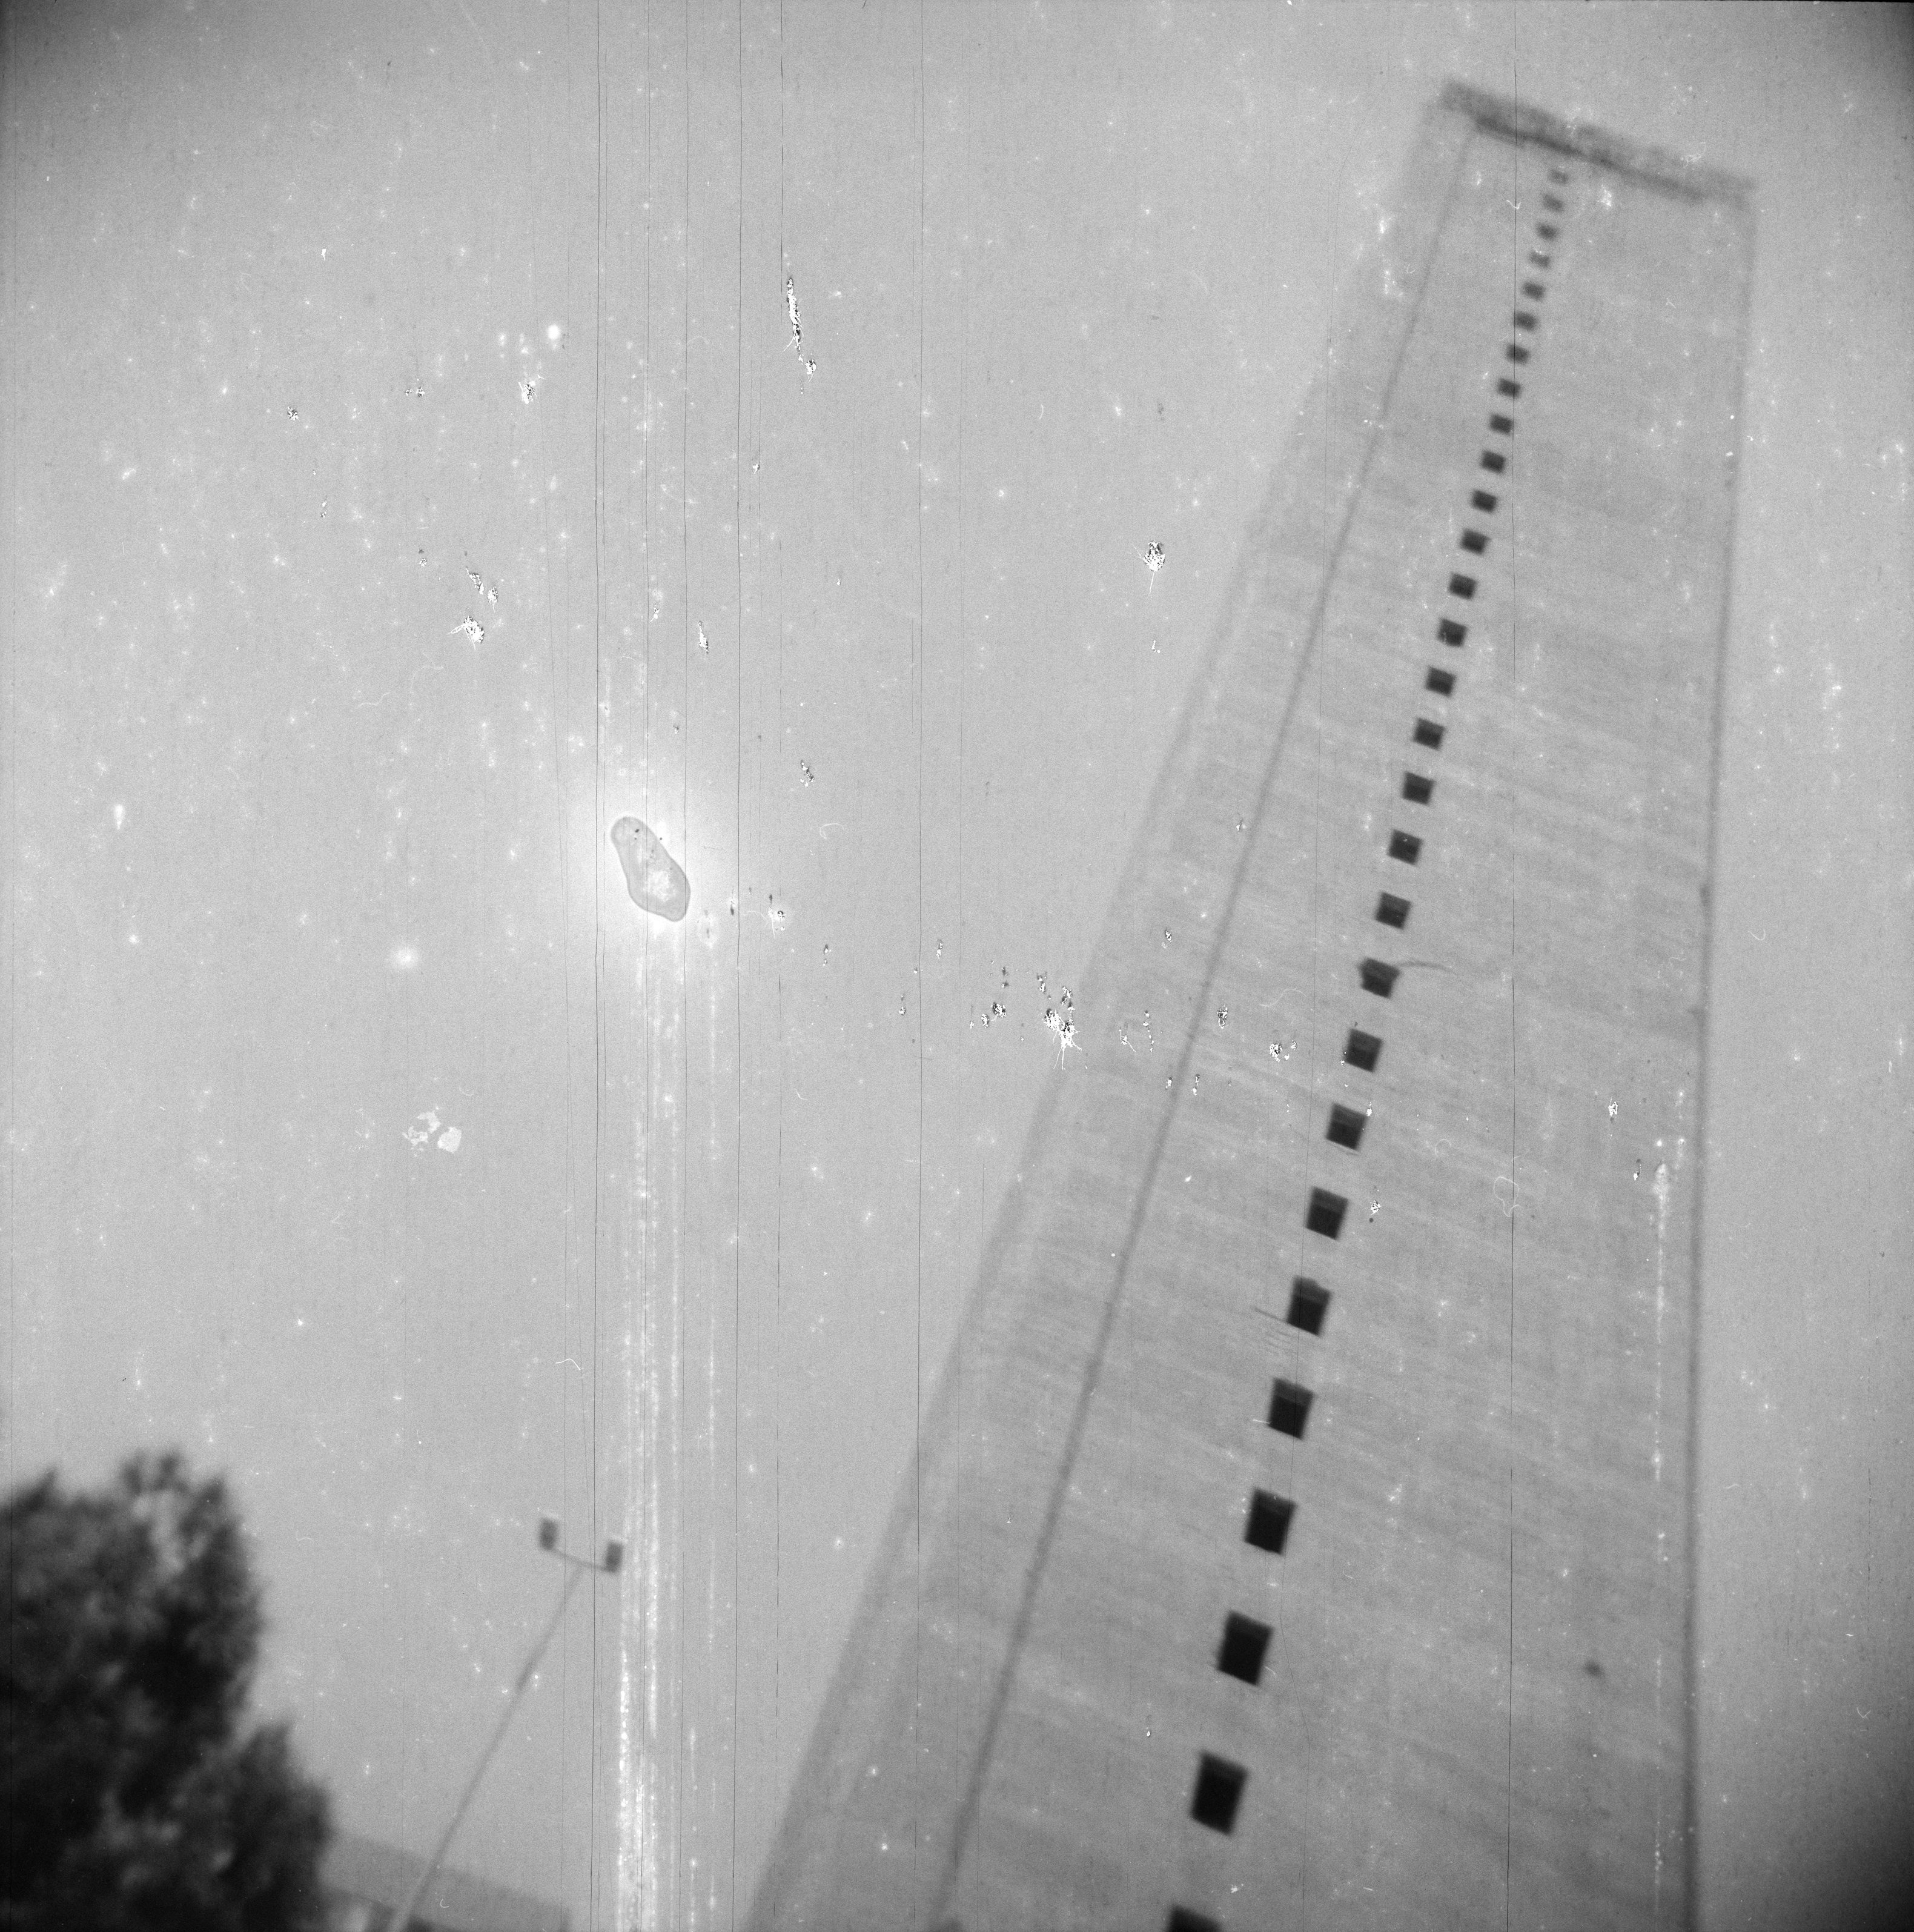 Ziad Antar,  Murr Tower, Wadi Abu Jmil, Built In 1973,  from the “Expired” series in 2009.